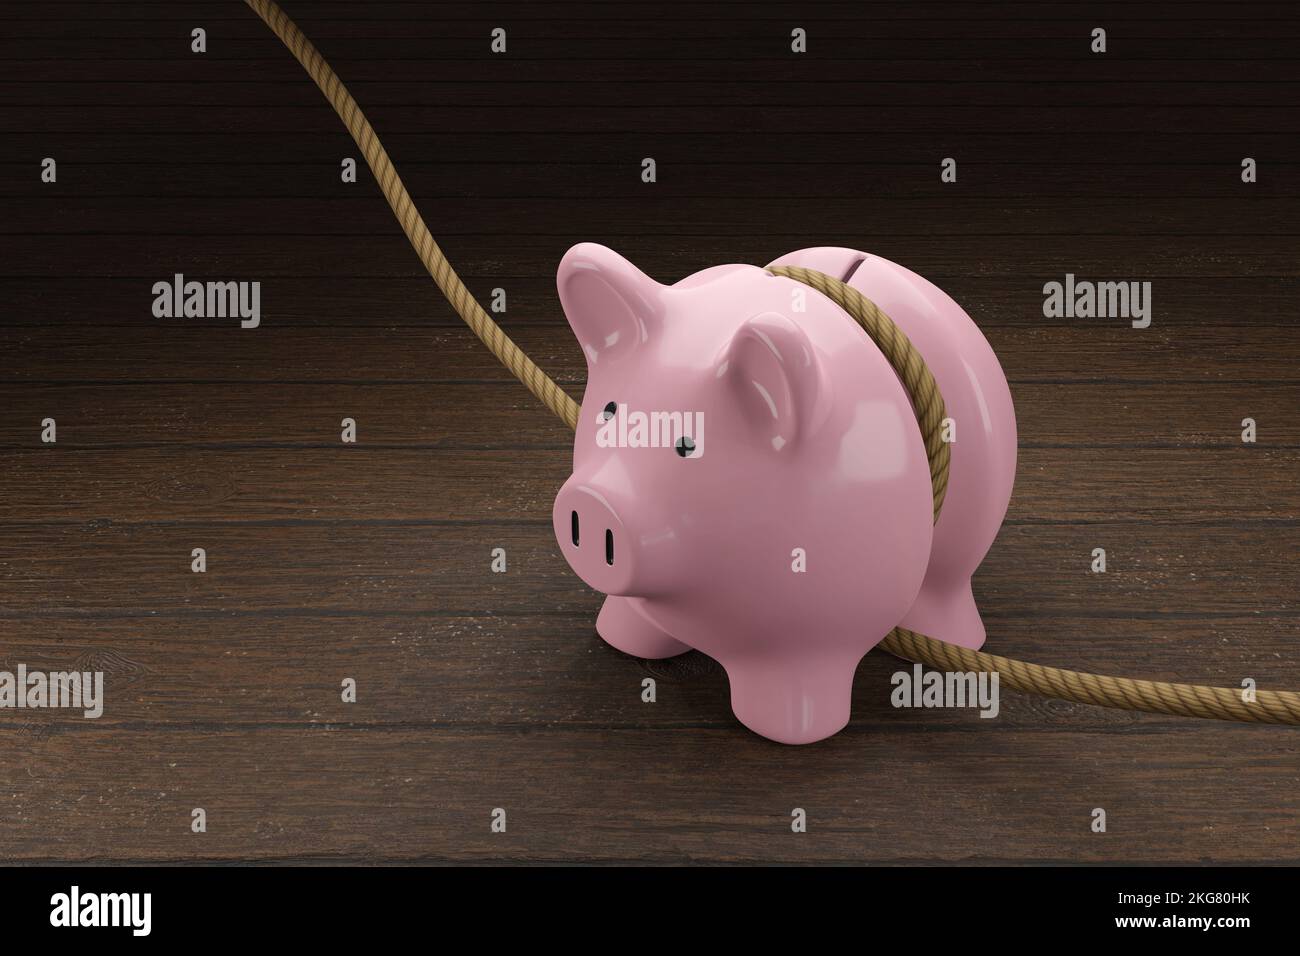 Pink piggy bank is tightened by a rope on wooden table. Illustration of the concept of budget tightening and reduction of spending Stock Photo